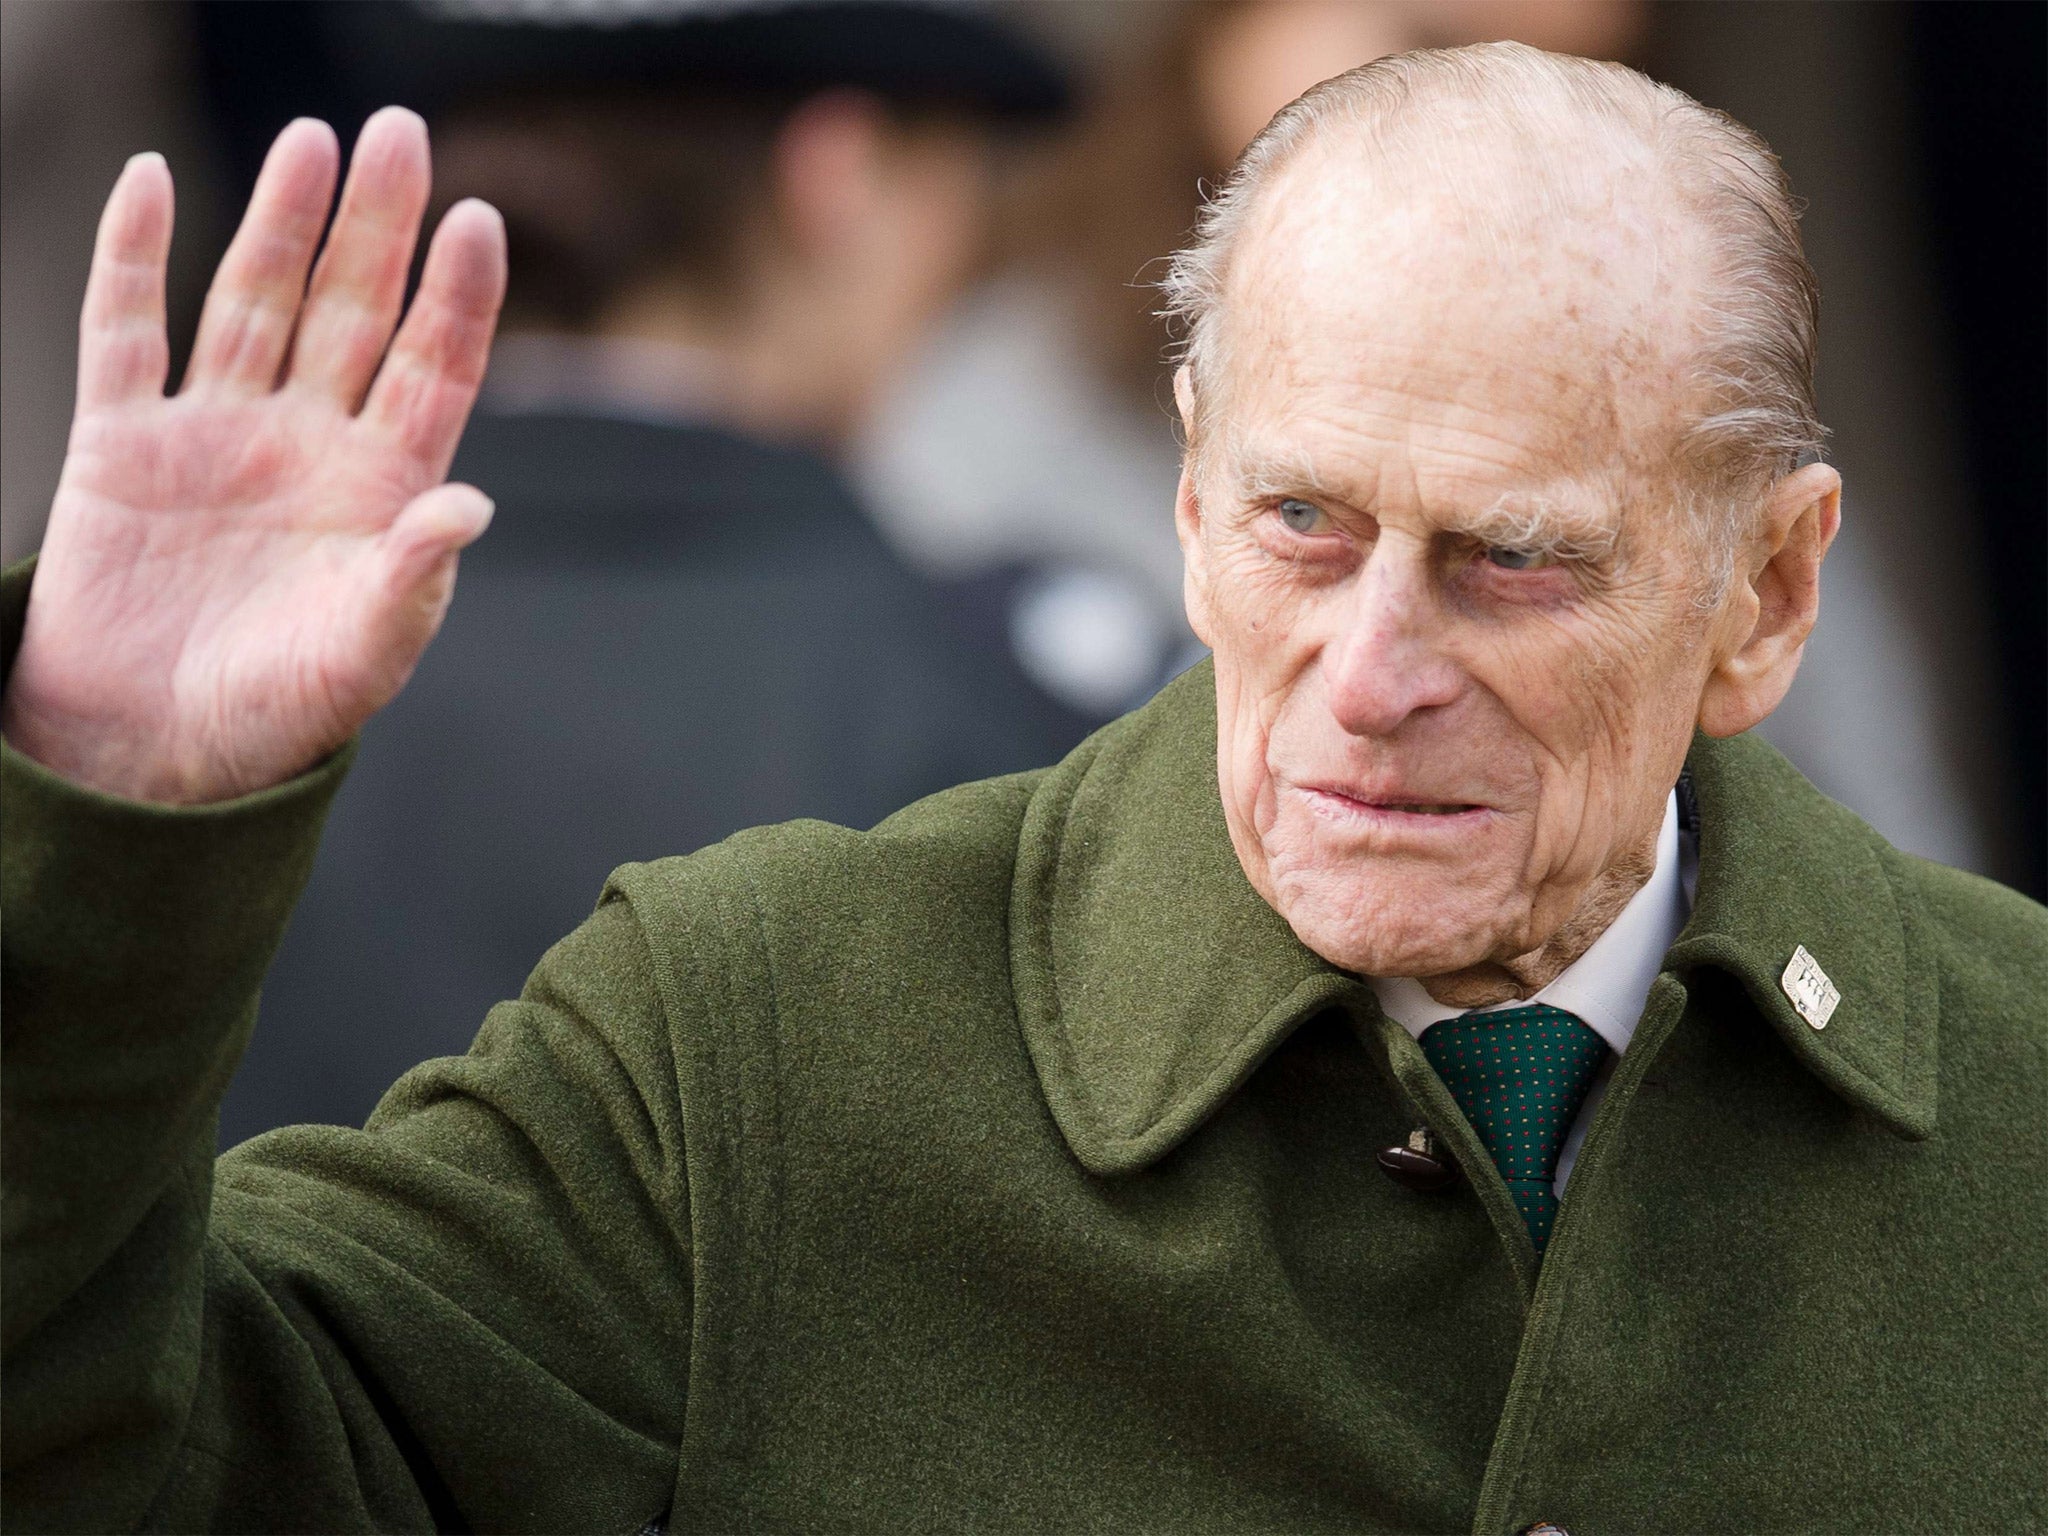 Prince Philip, 90: Appointed to the Privy Council by King George VI on 4 November 1951, the Duke of Edinburgh has been a member longer than anyone else alive